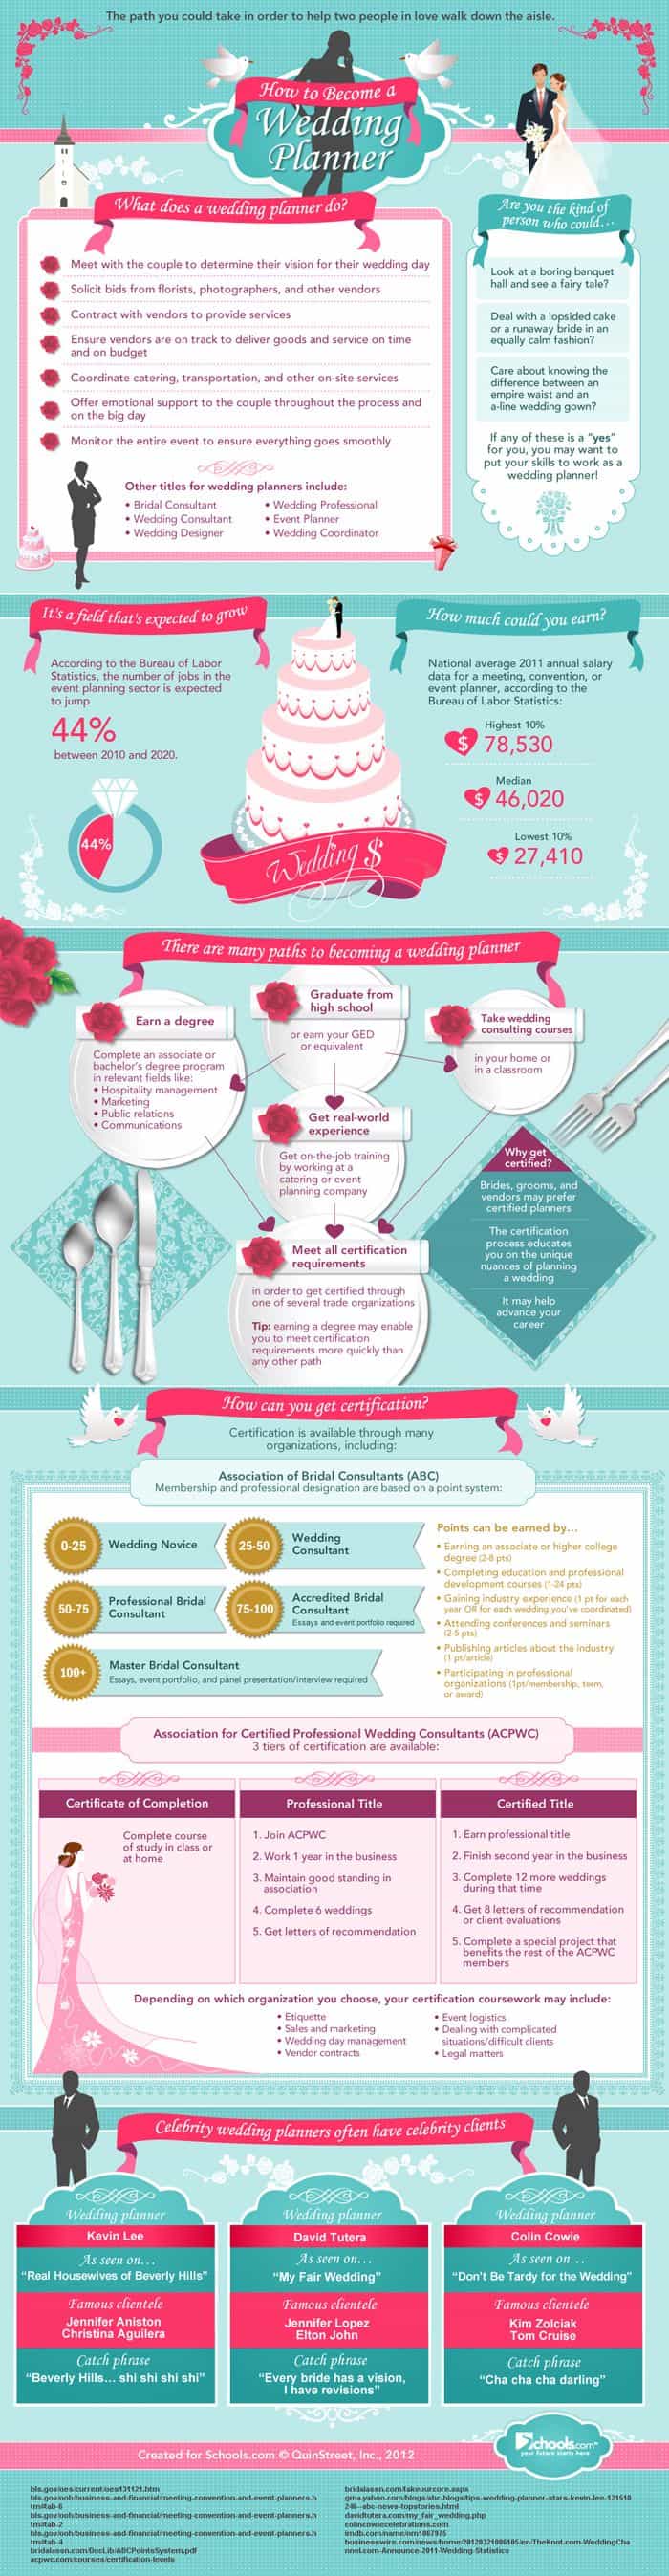 How to Get Started in Wedding Planning - The Event Certificate ...